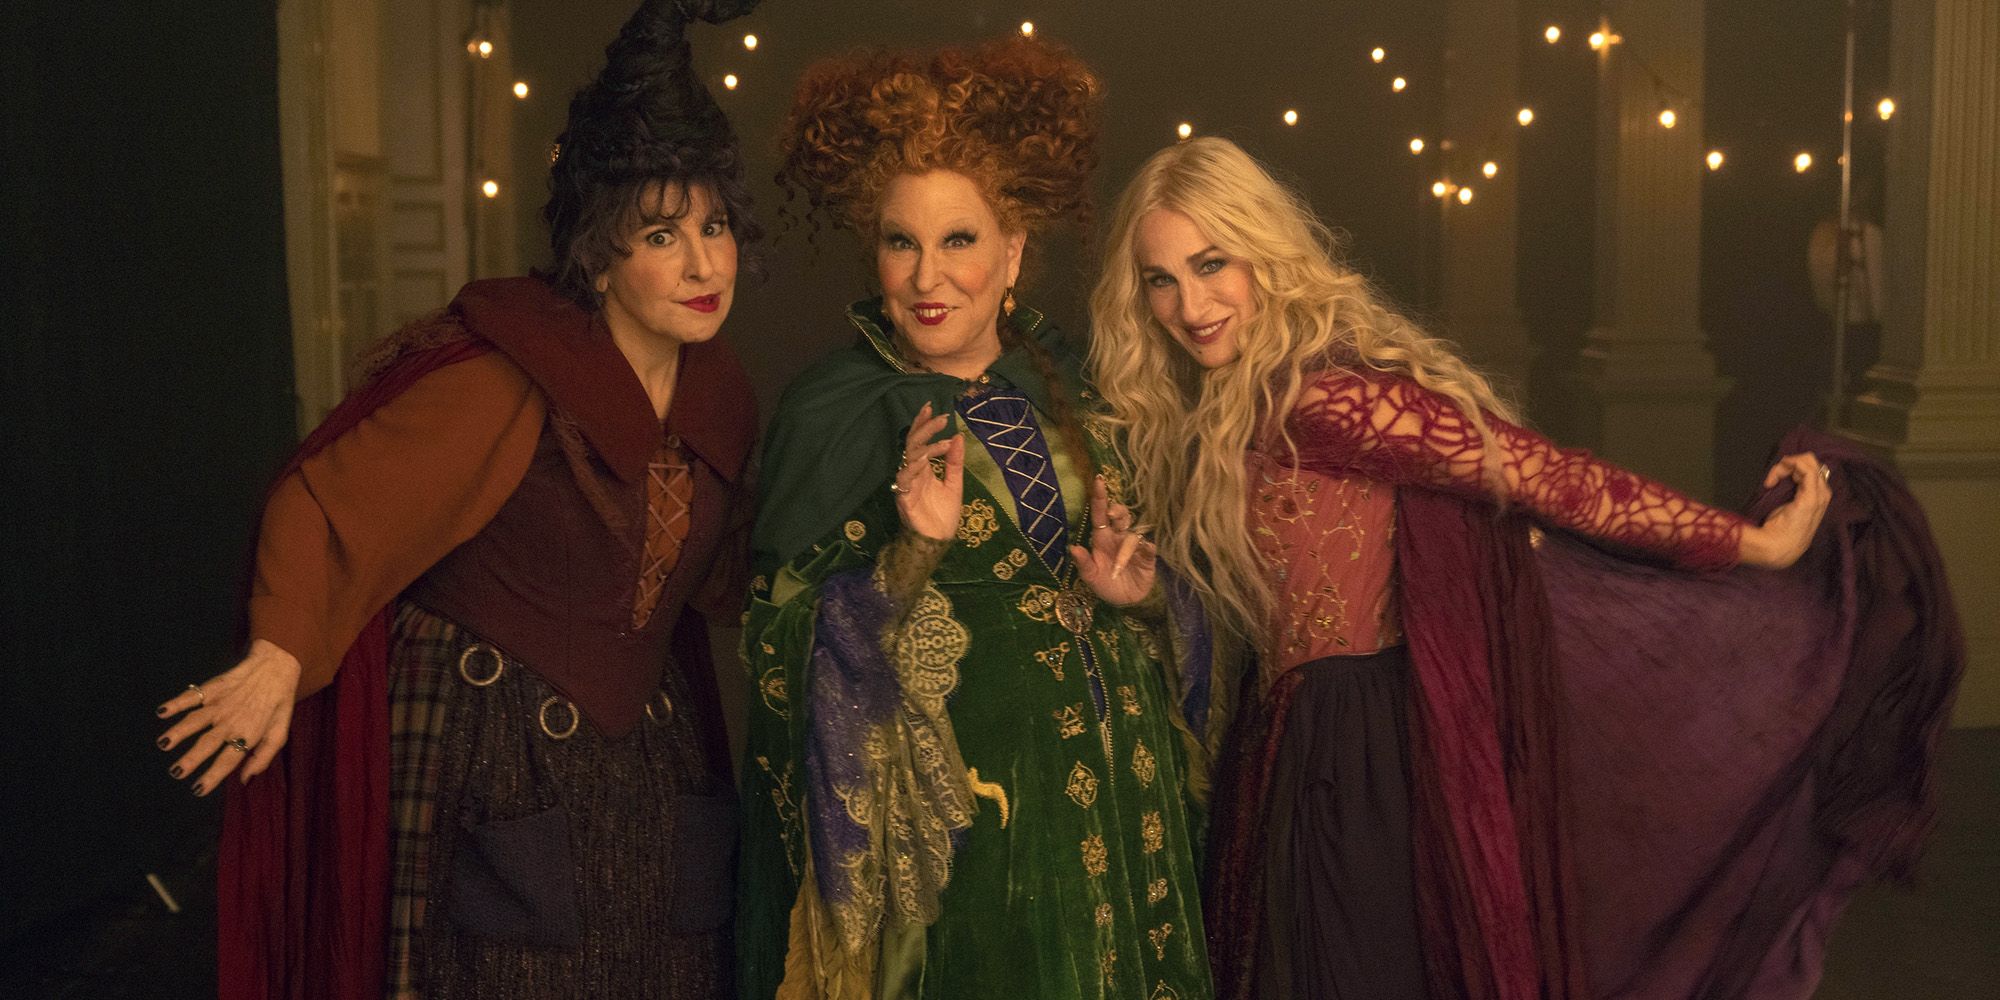 The Sanderson sisters posing together for a photo in Hocus Pocus 2.